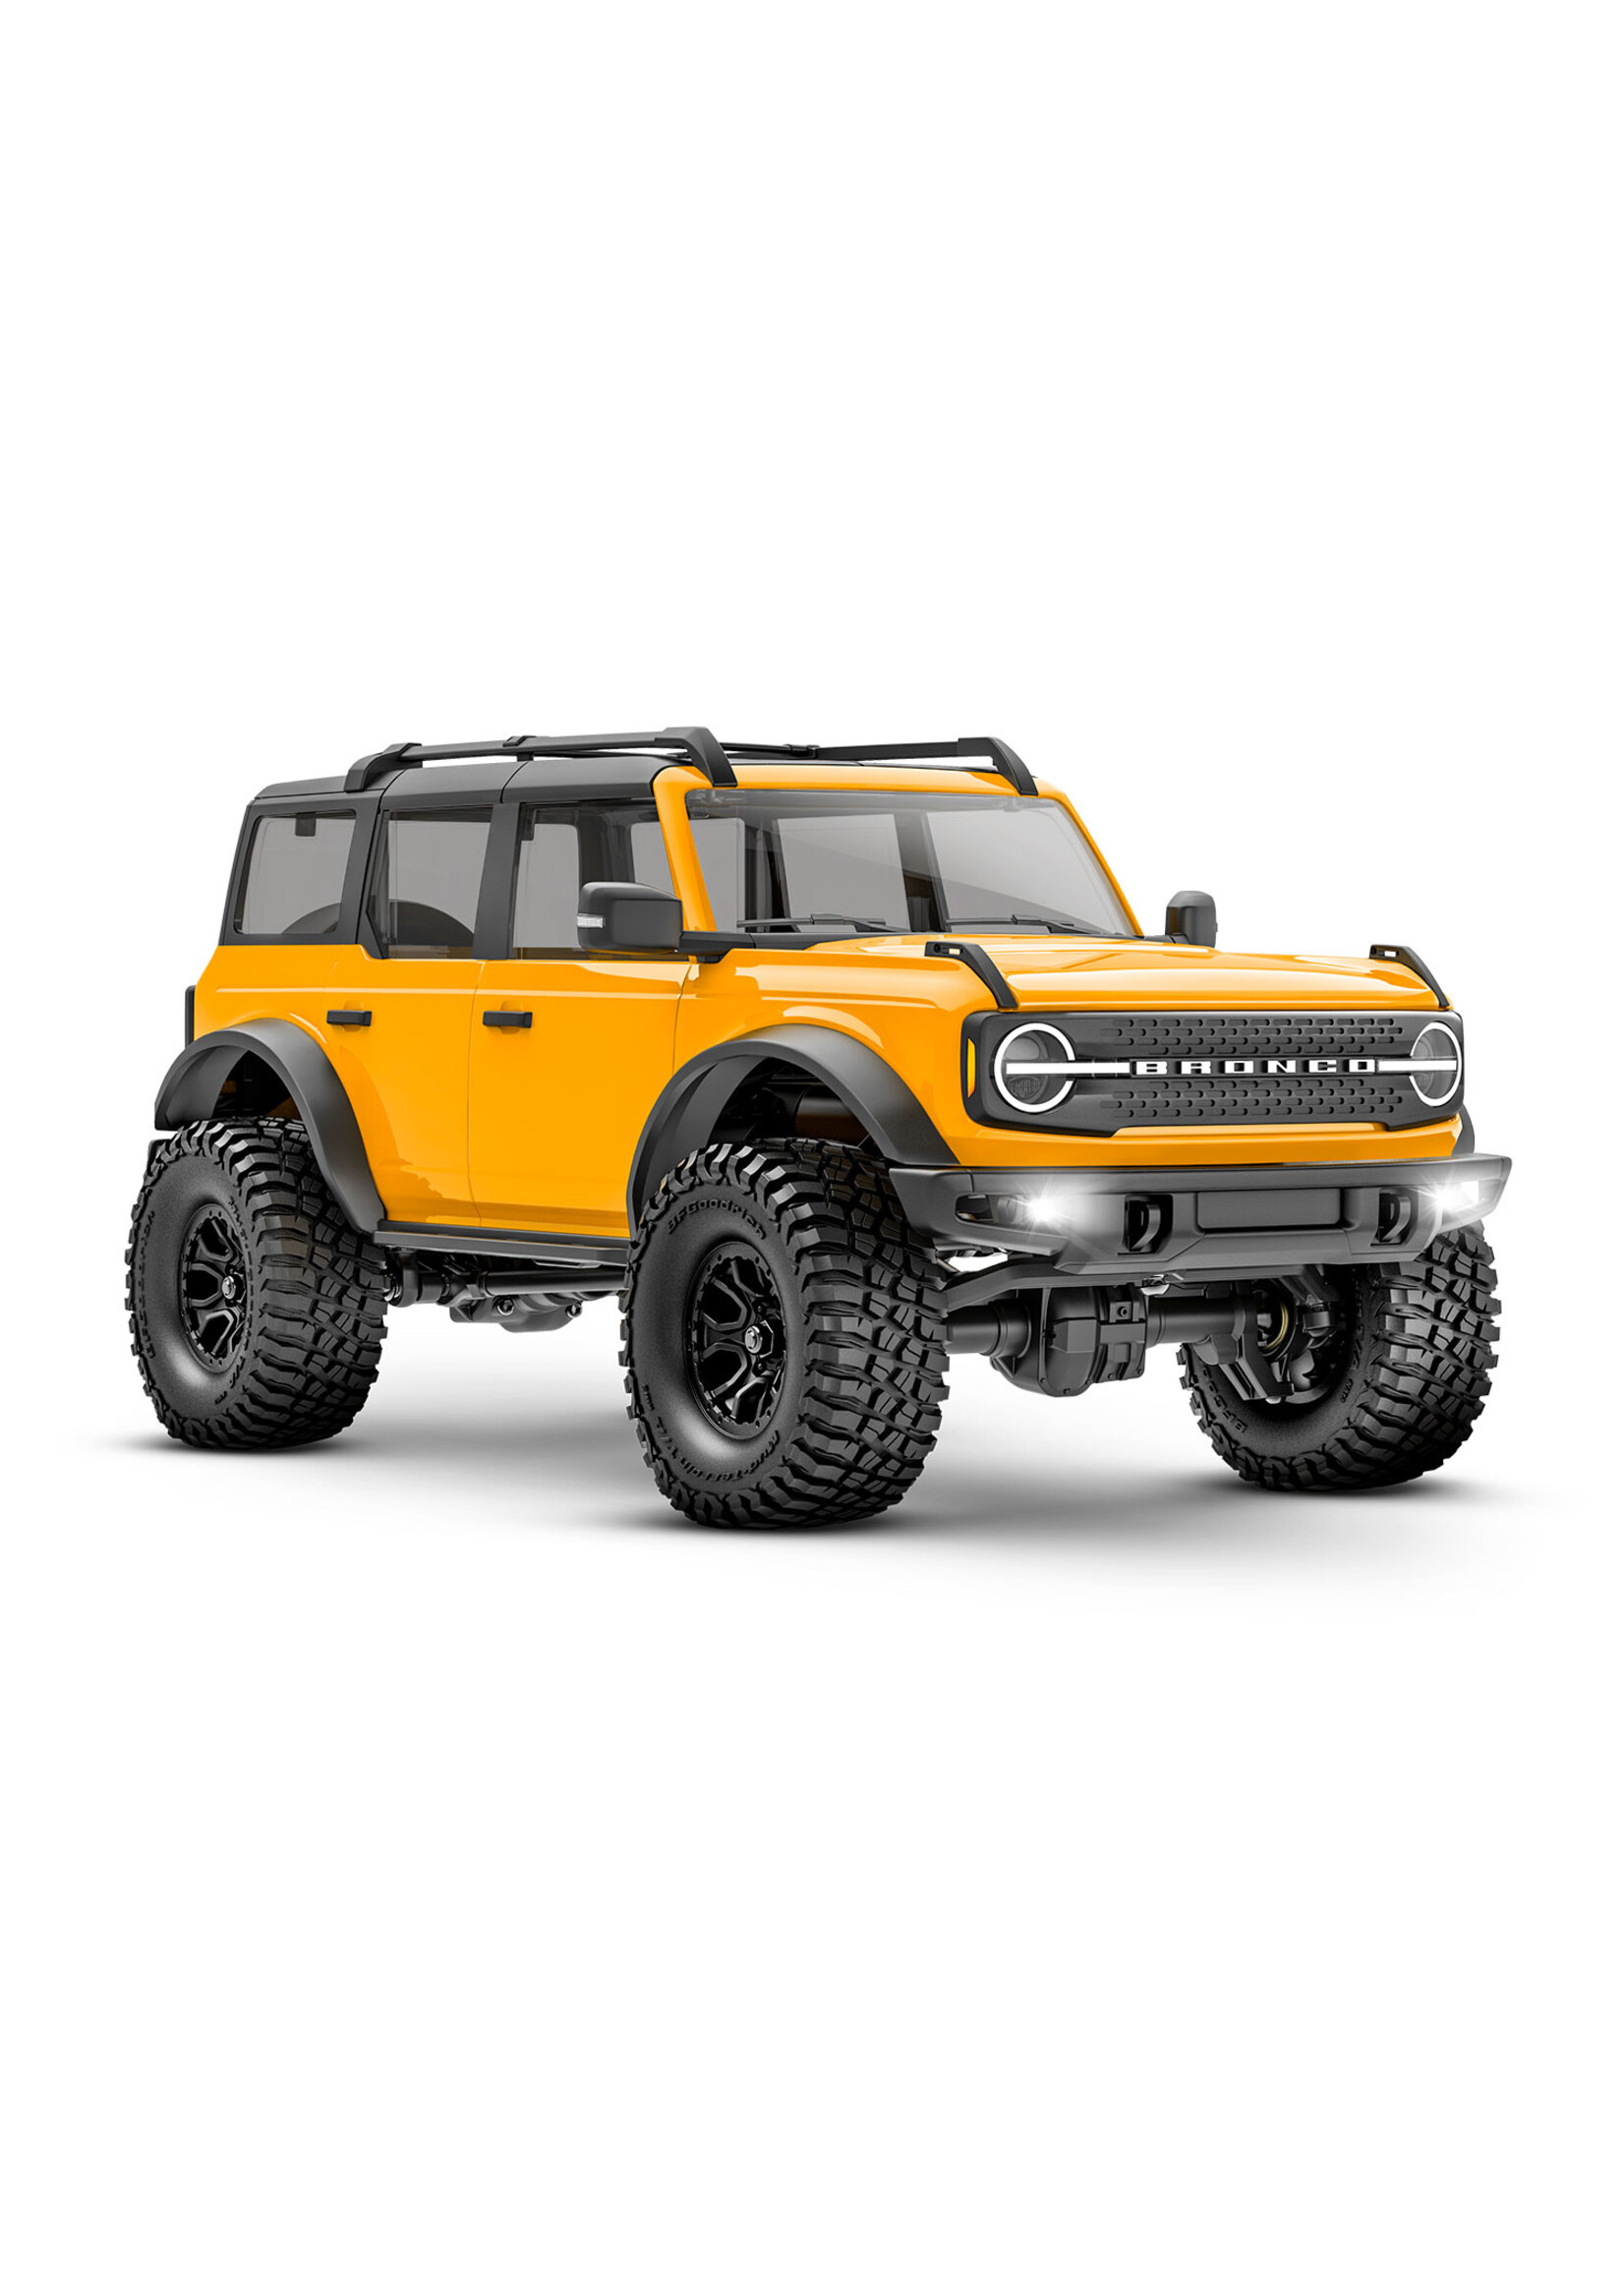 Traxxas 970741ORNG - 1/18 RTR Scale and Trail Bronco - Orange